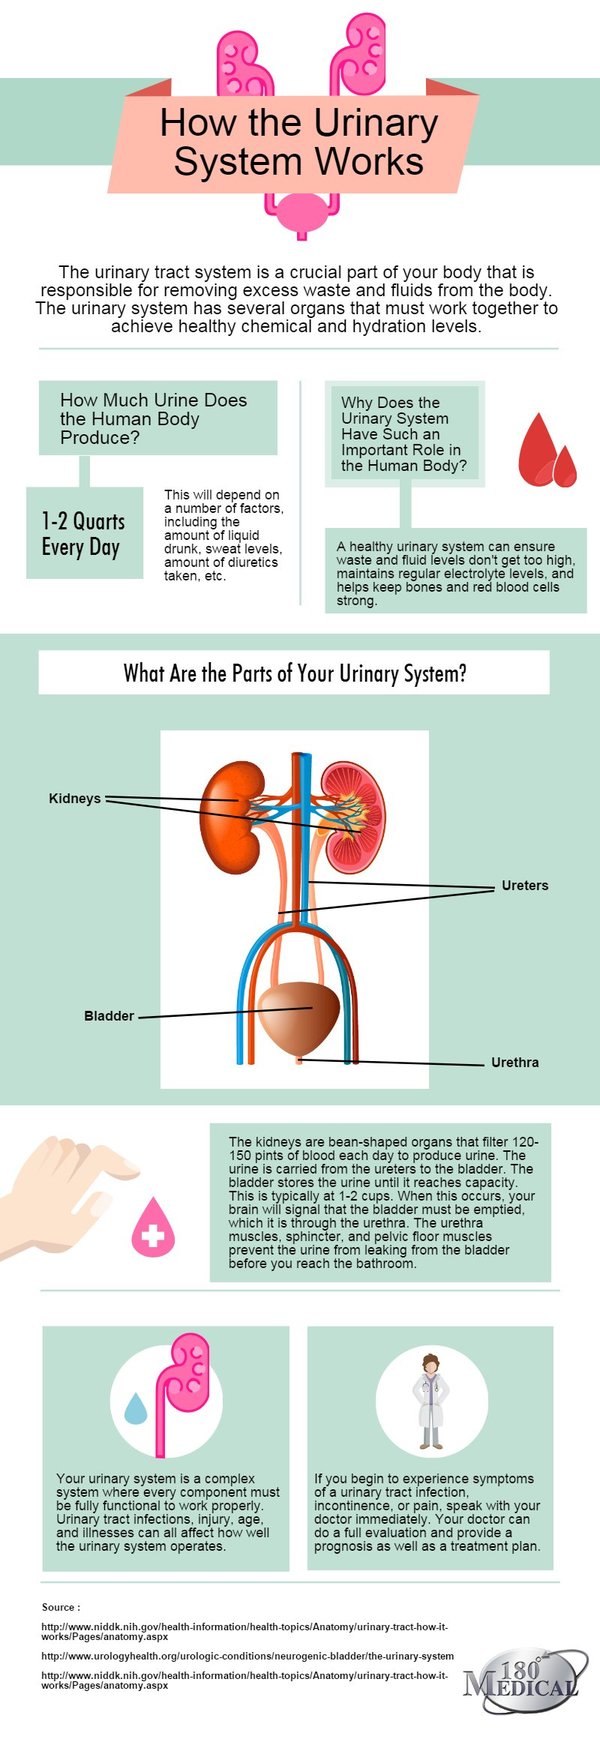 How the Urinary System Works